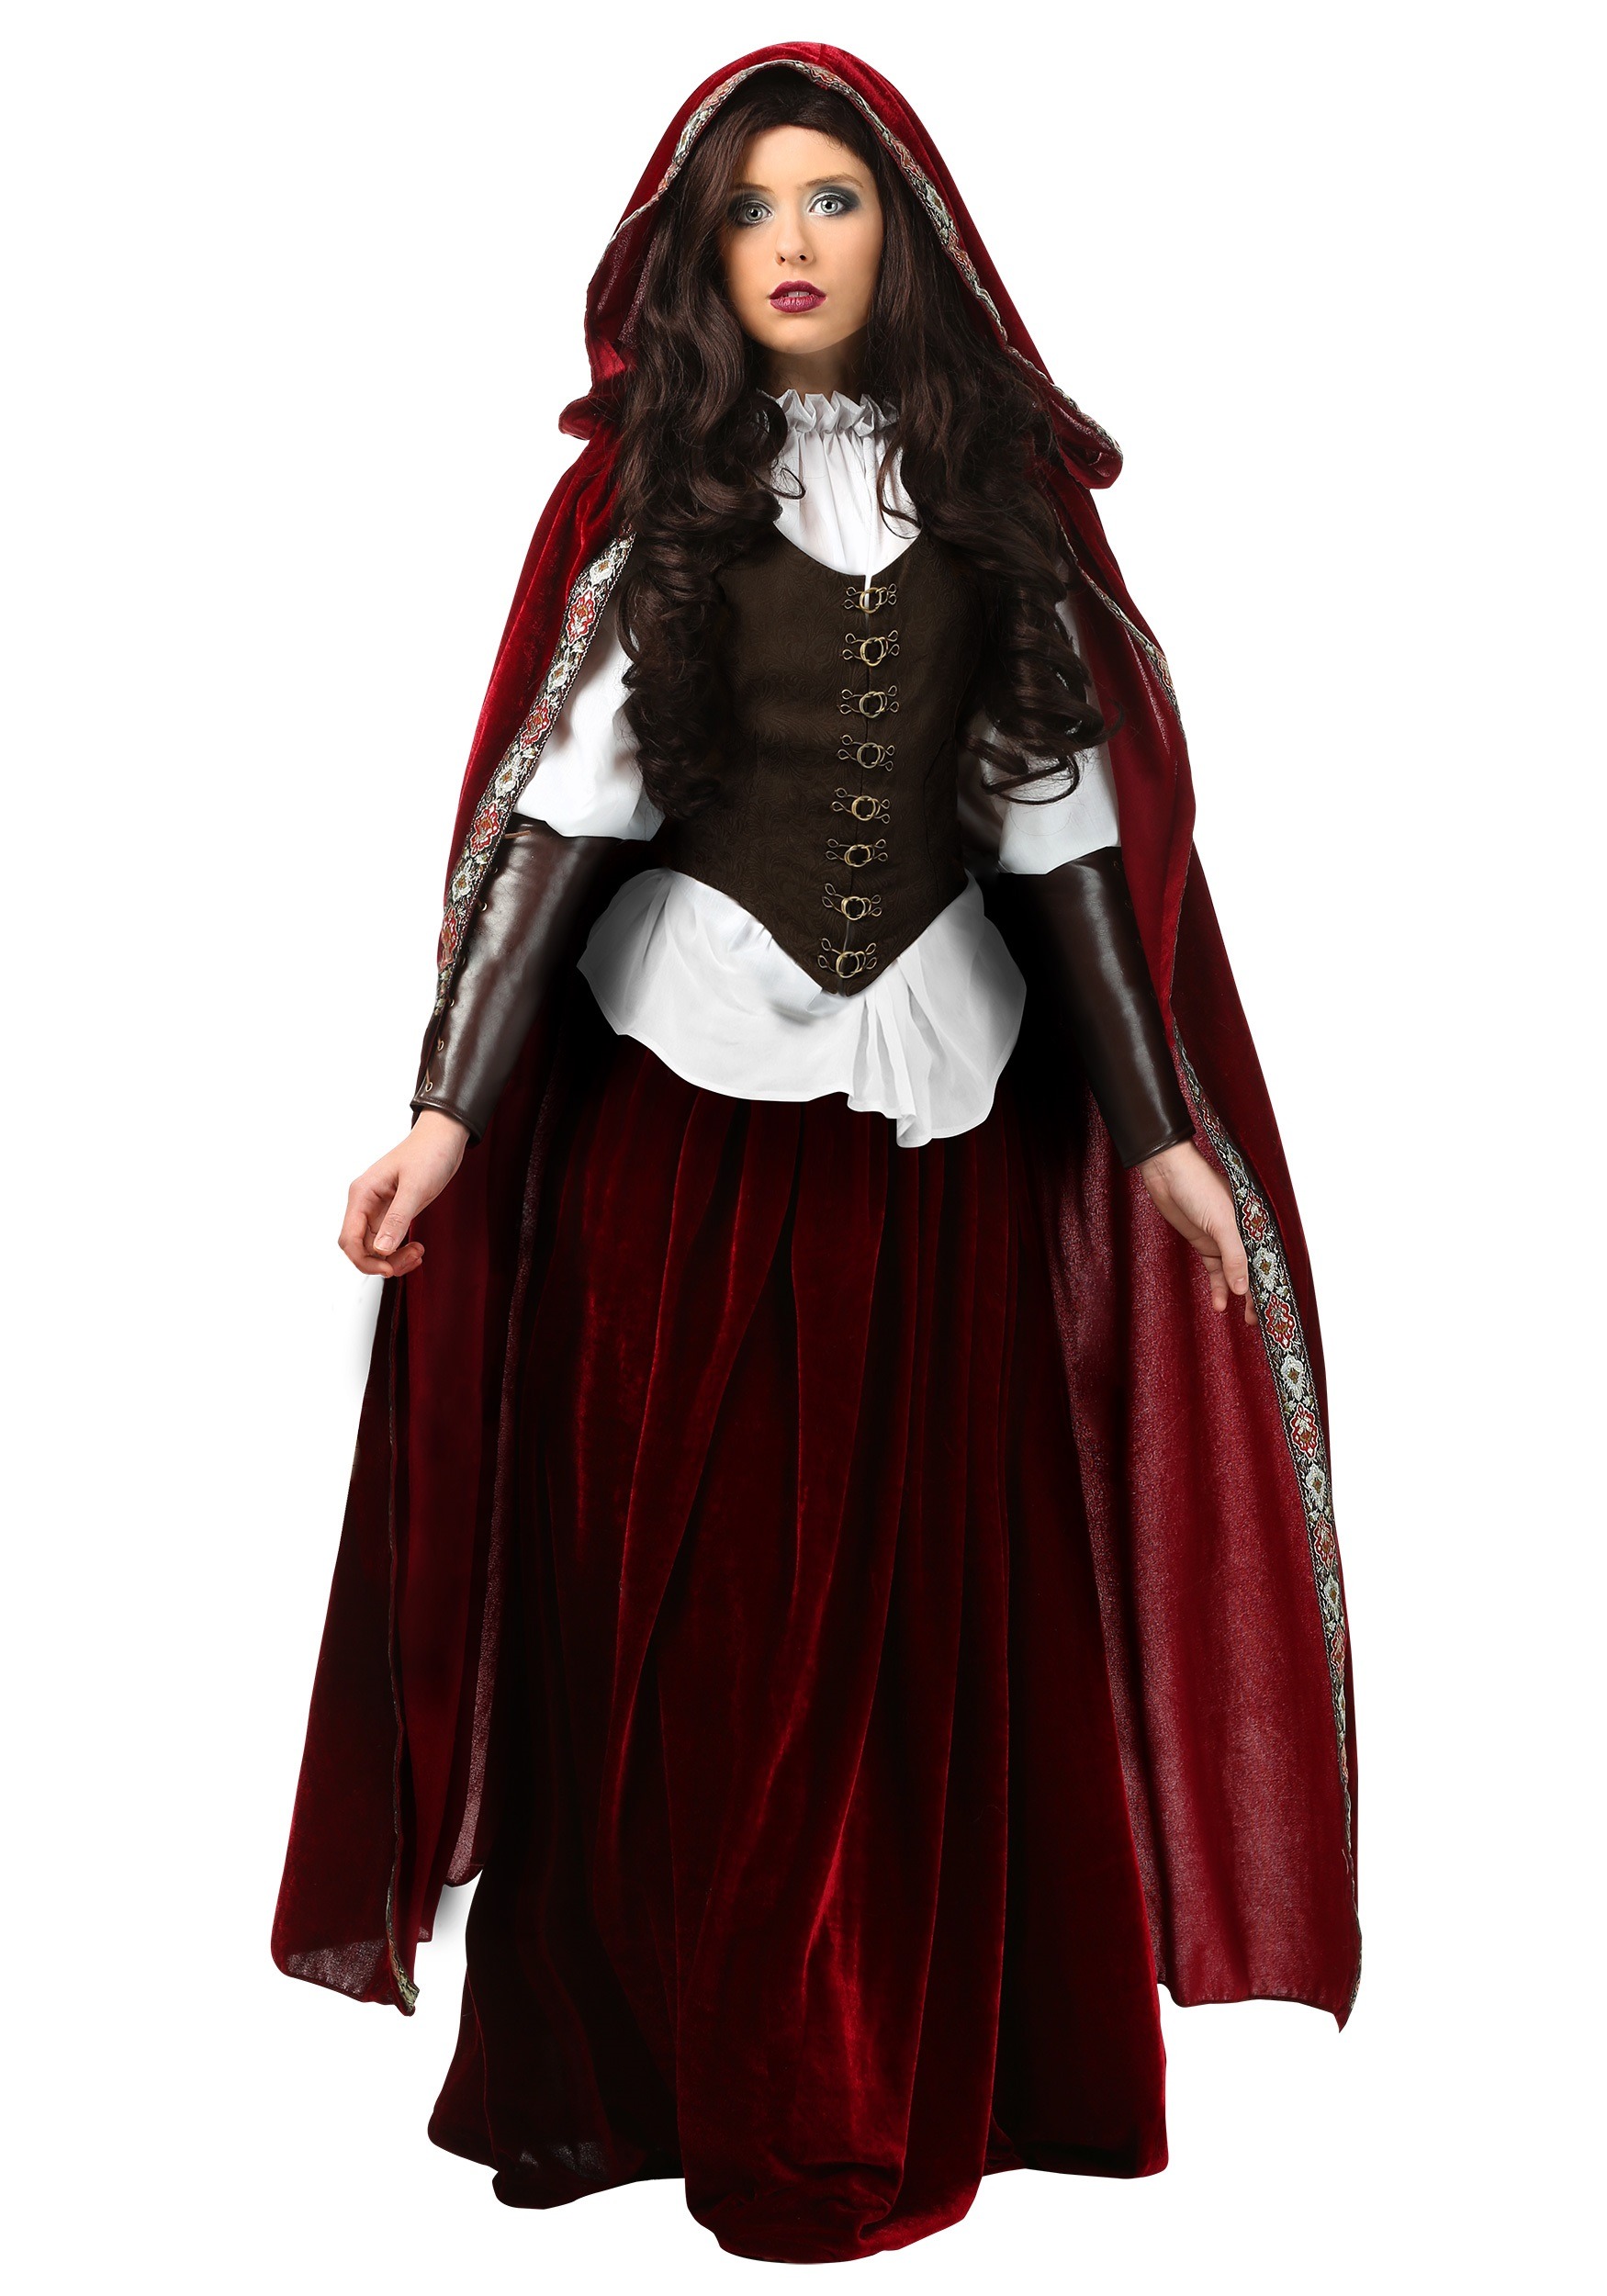 Image of Deluxe Red Riding Hood Plus Size Women's Costume | Exclusive ID FUN2382PL-5X